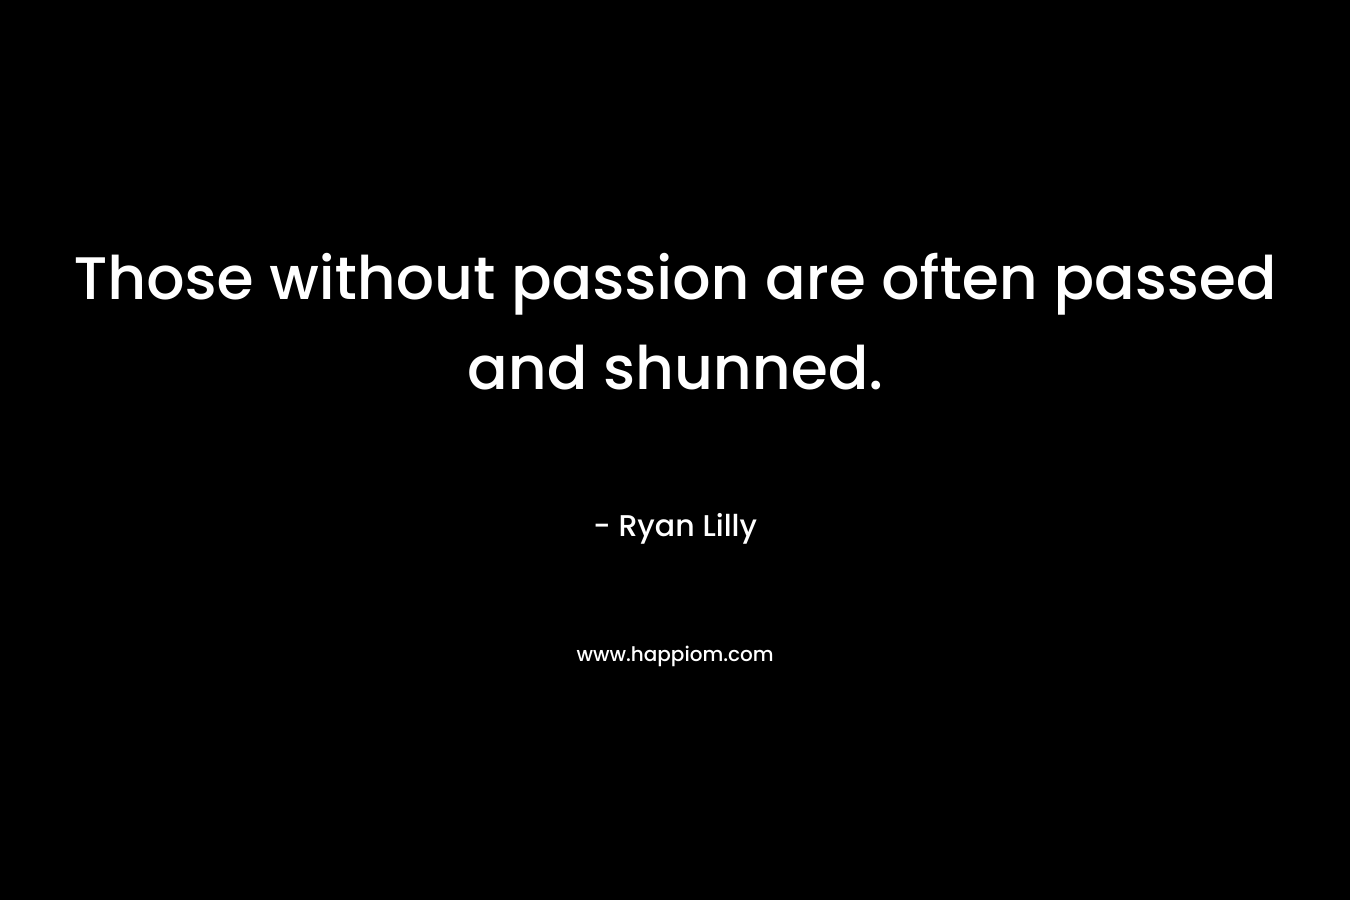 Those without passion are often passed and shunned. – Ryan Lilly